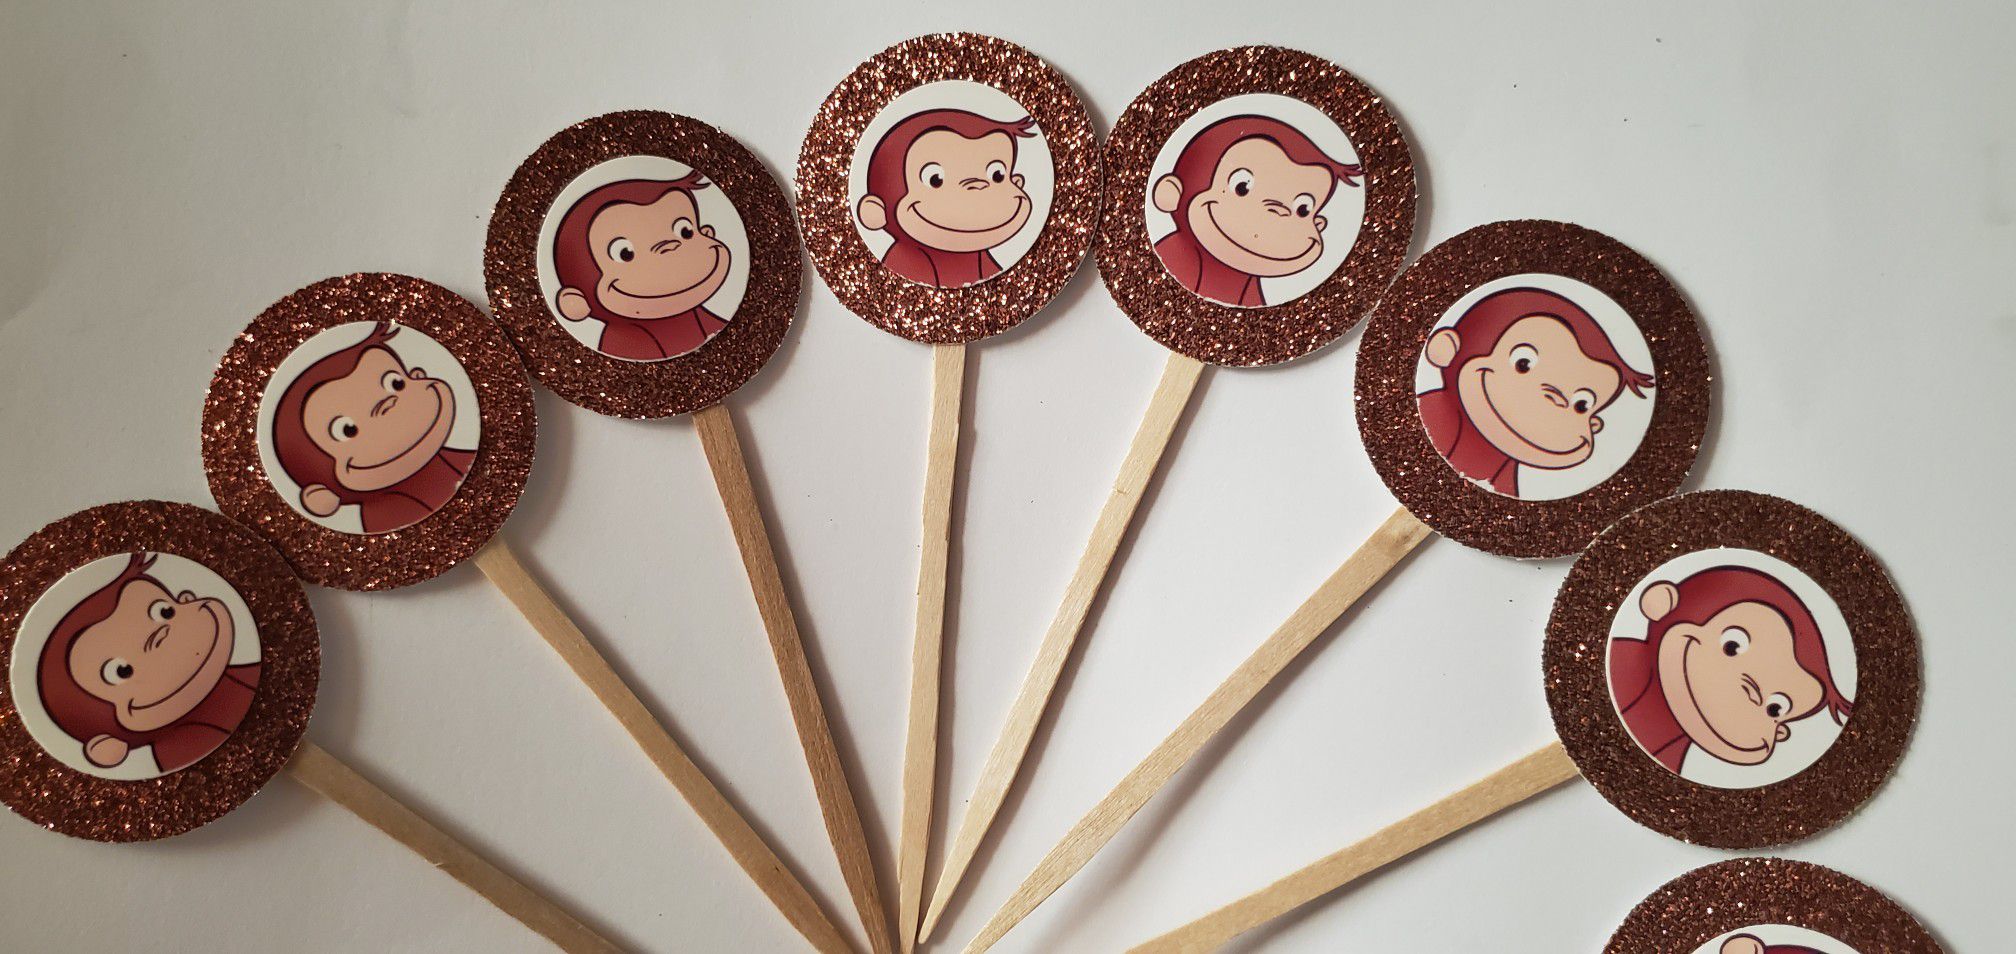 24 curious George cupcake toppers birthday party Favors supplies monkey decor